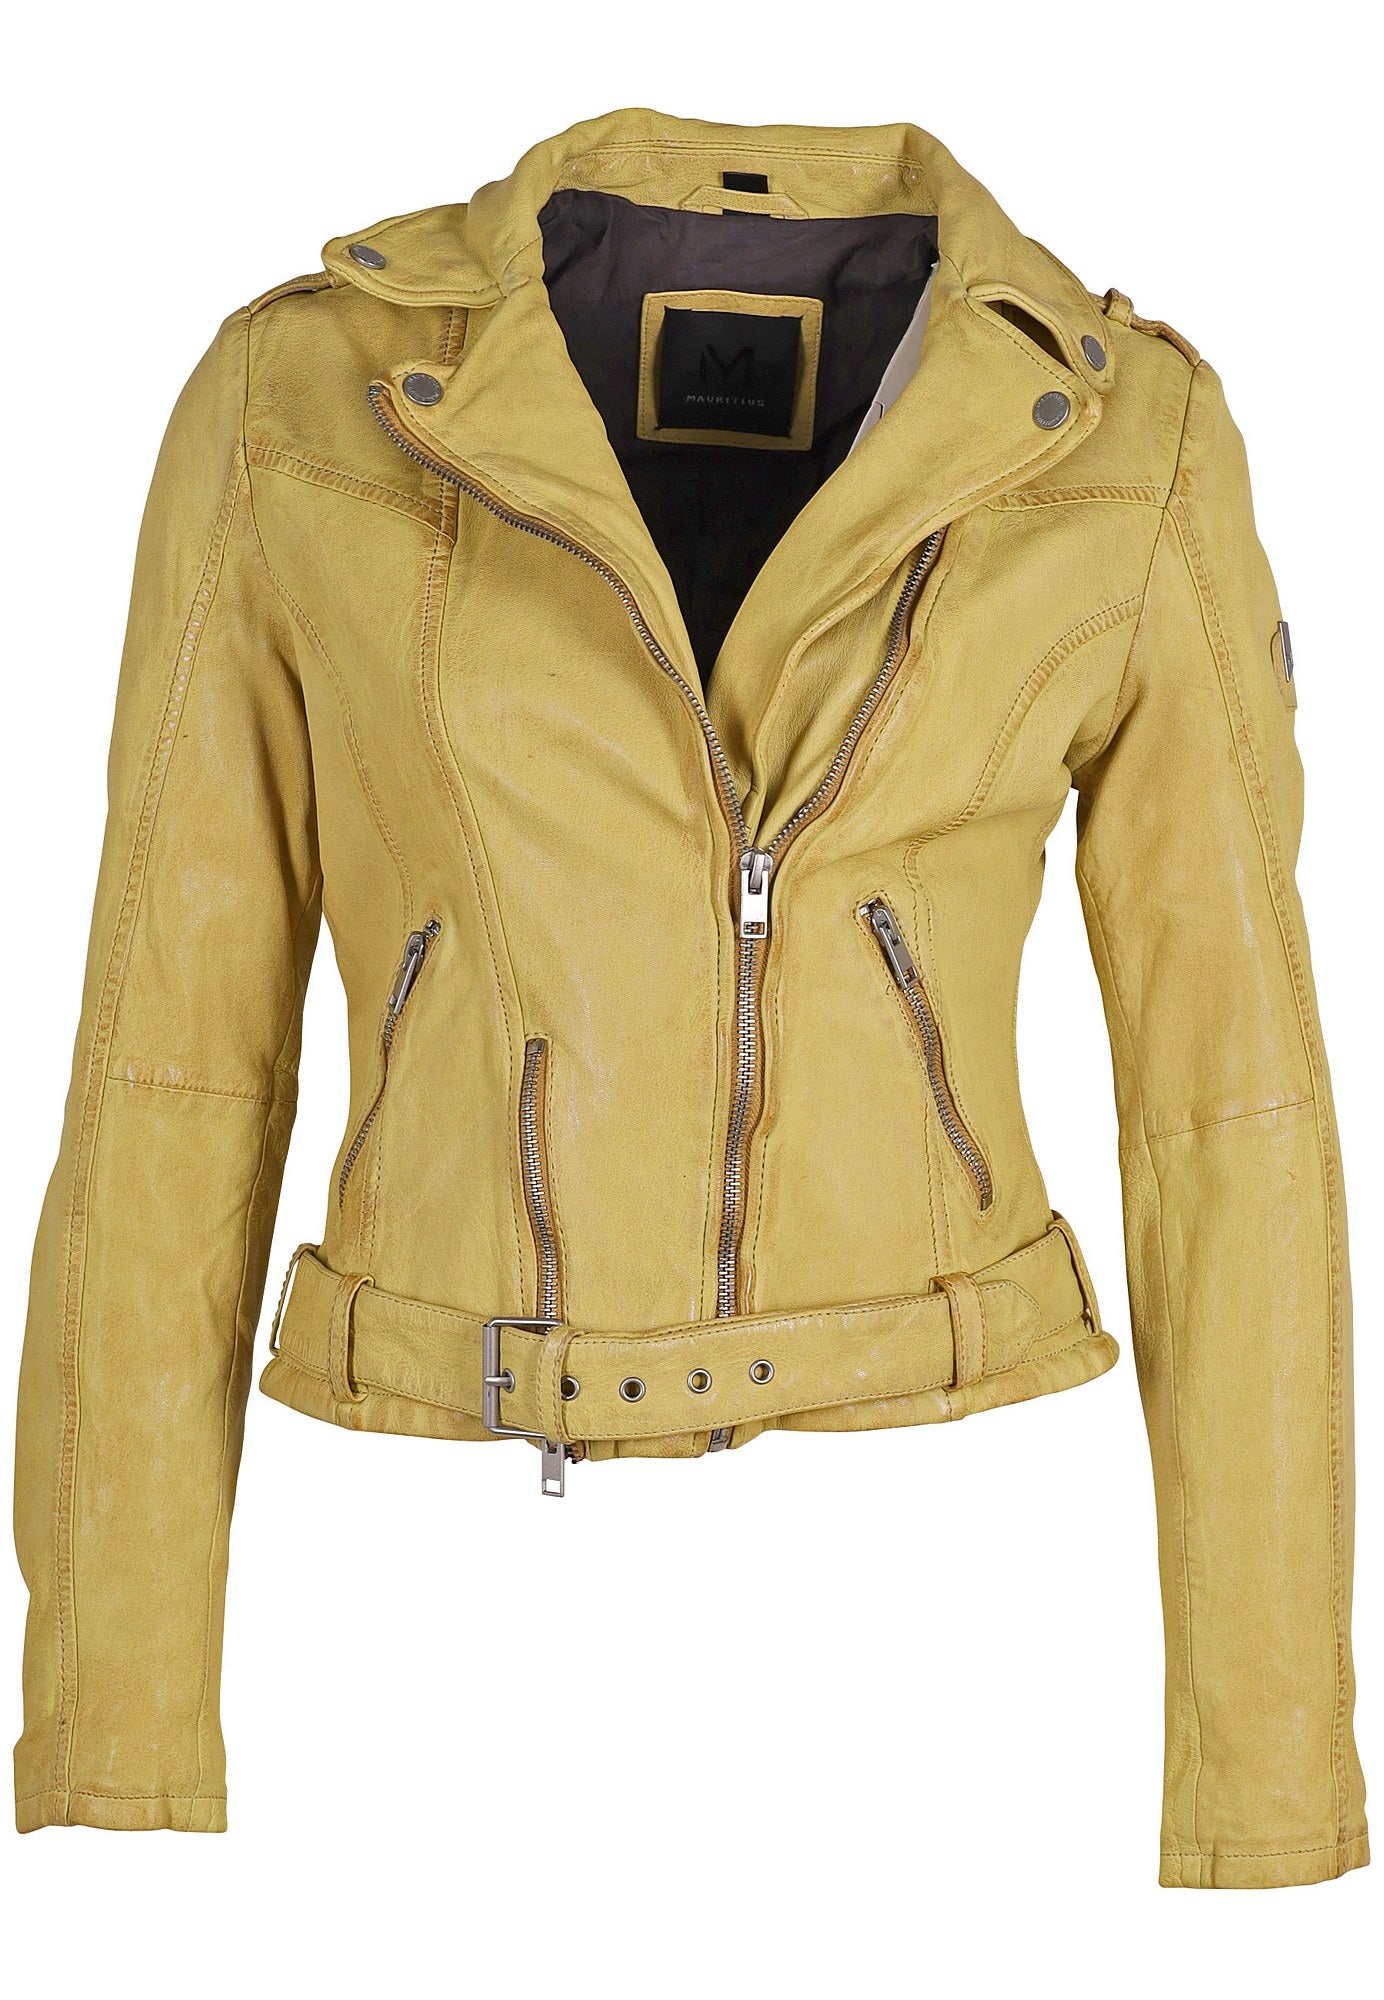 Mauritius Mauritius - Wild 2 Leather Woman's Jacket - Butter available at The Good Life Boutique